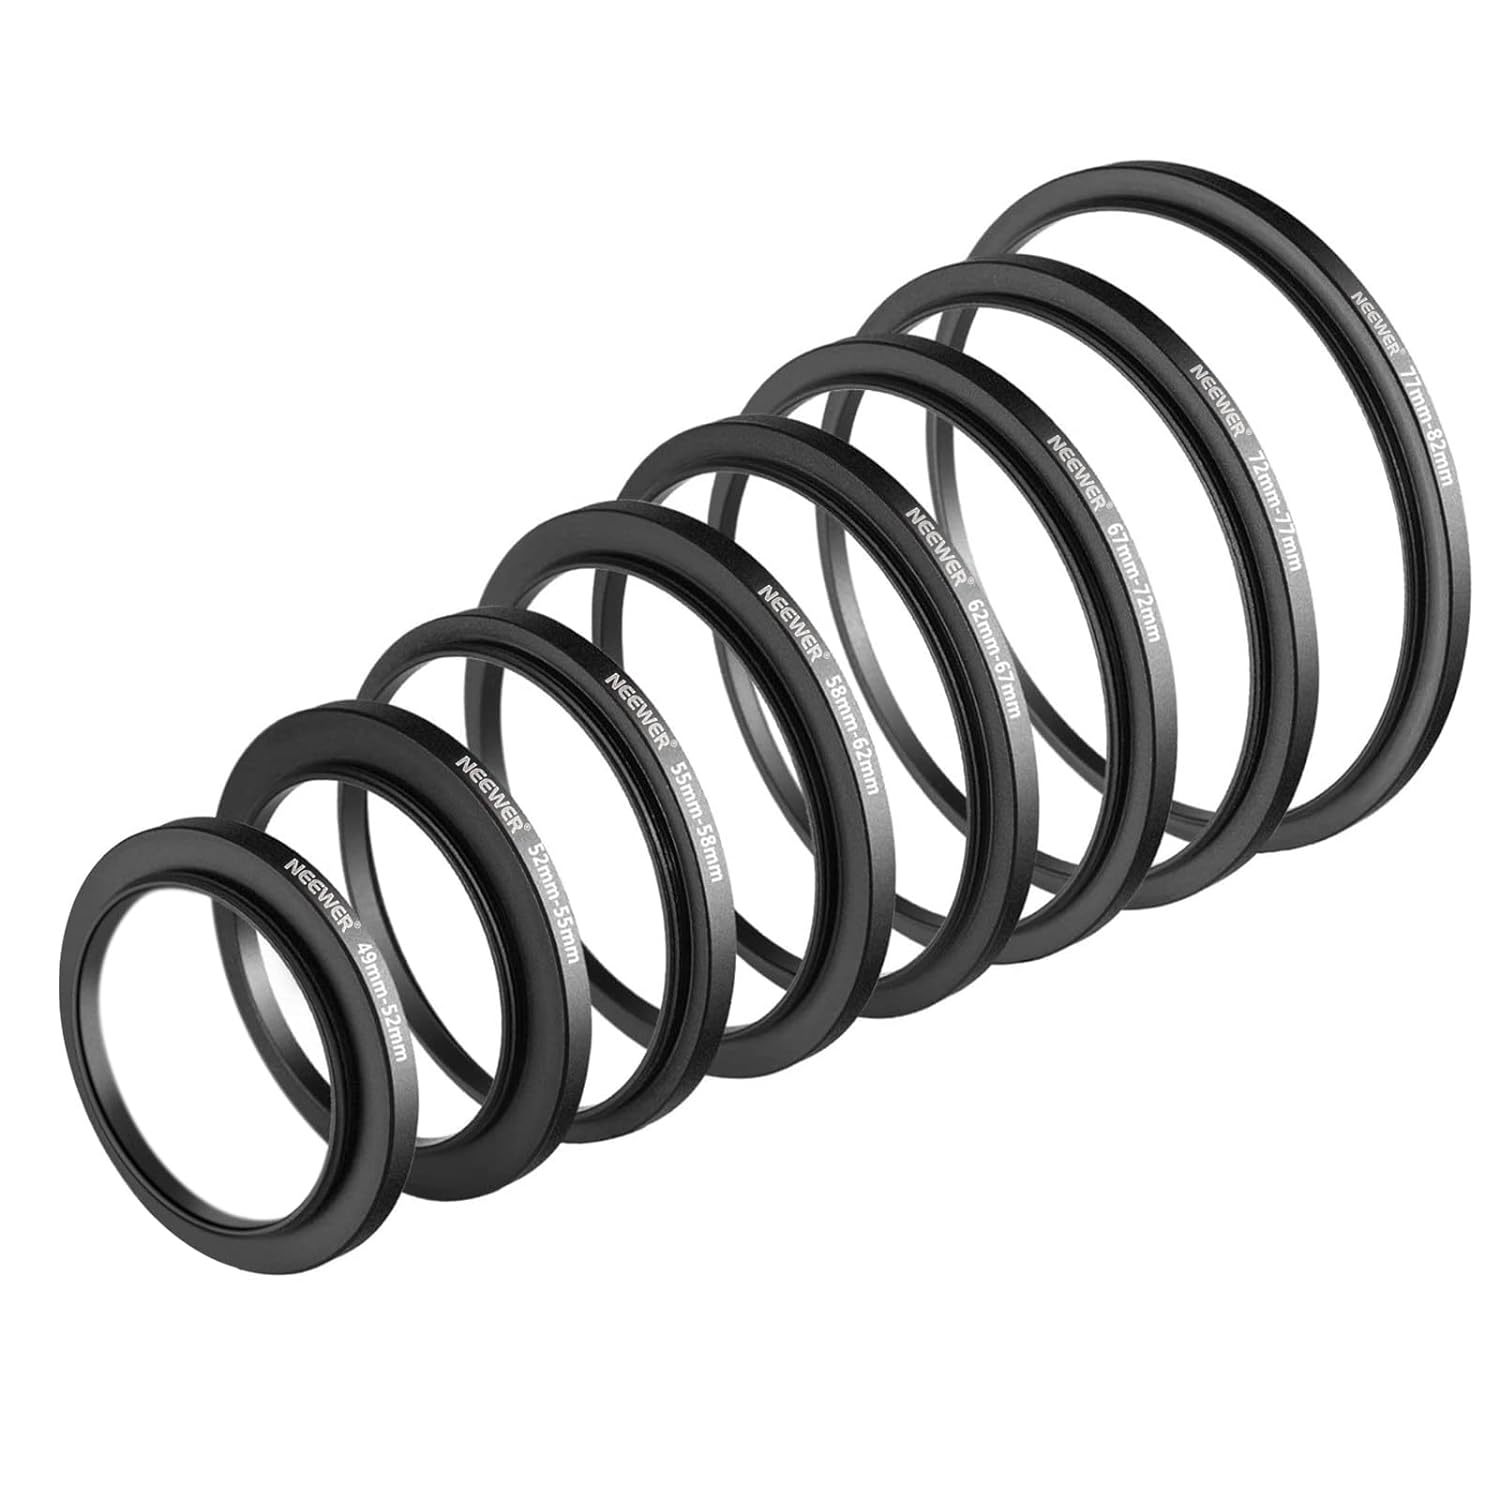 Neewer 8 Pieces Step-up Adapter Ring Set Made of Premium Anodized Aluminum, Incl - $36.99